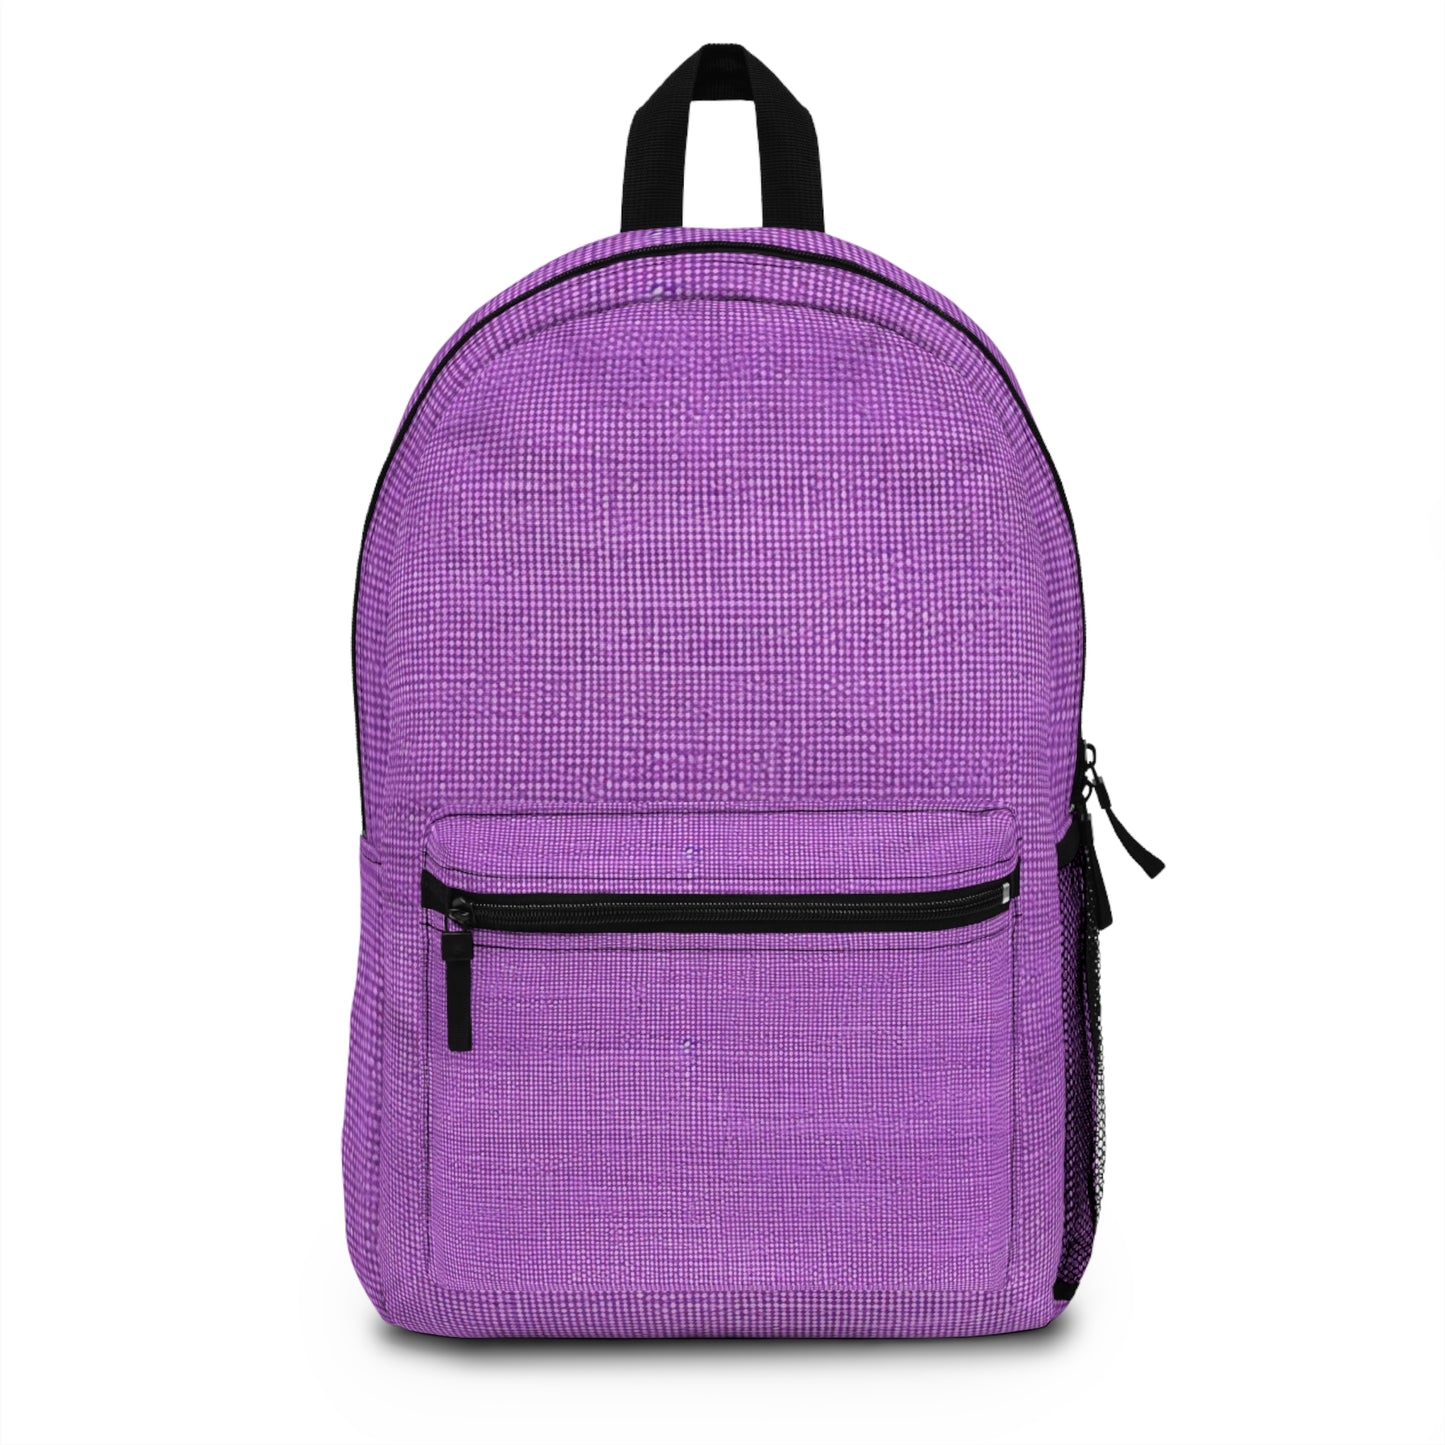 Hyper Iris Orchid Red: Denim-Inspired, Bold Style - Backpack